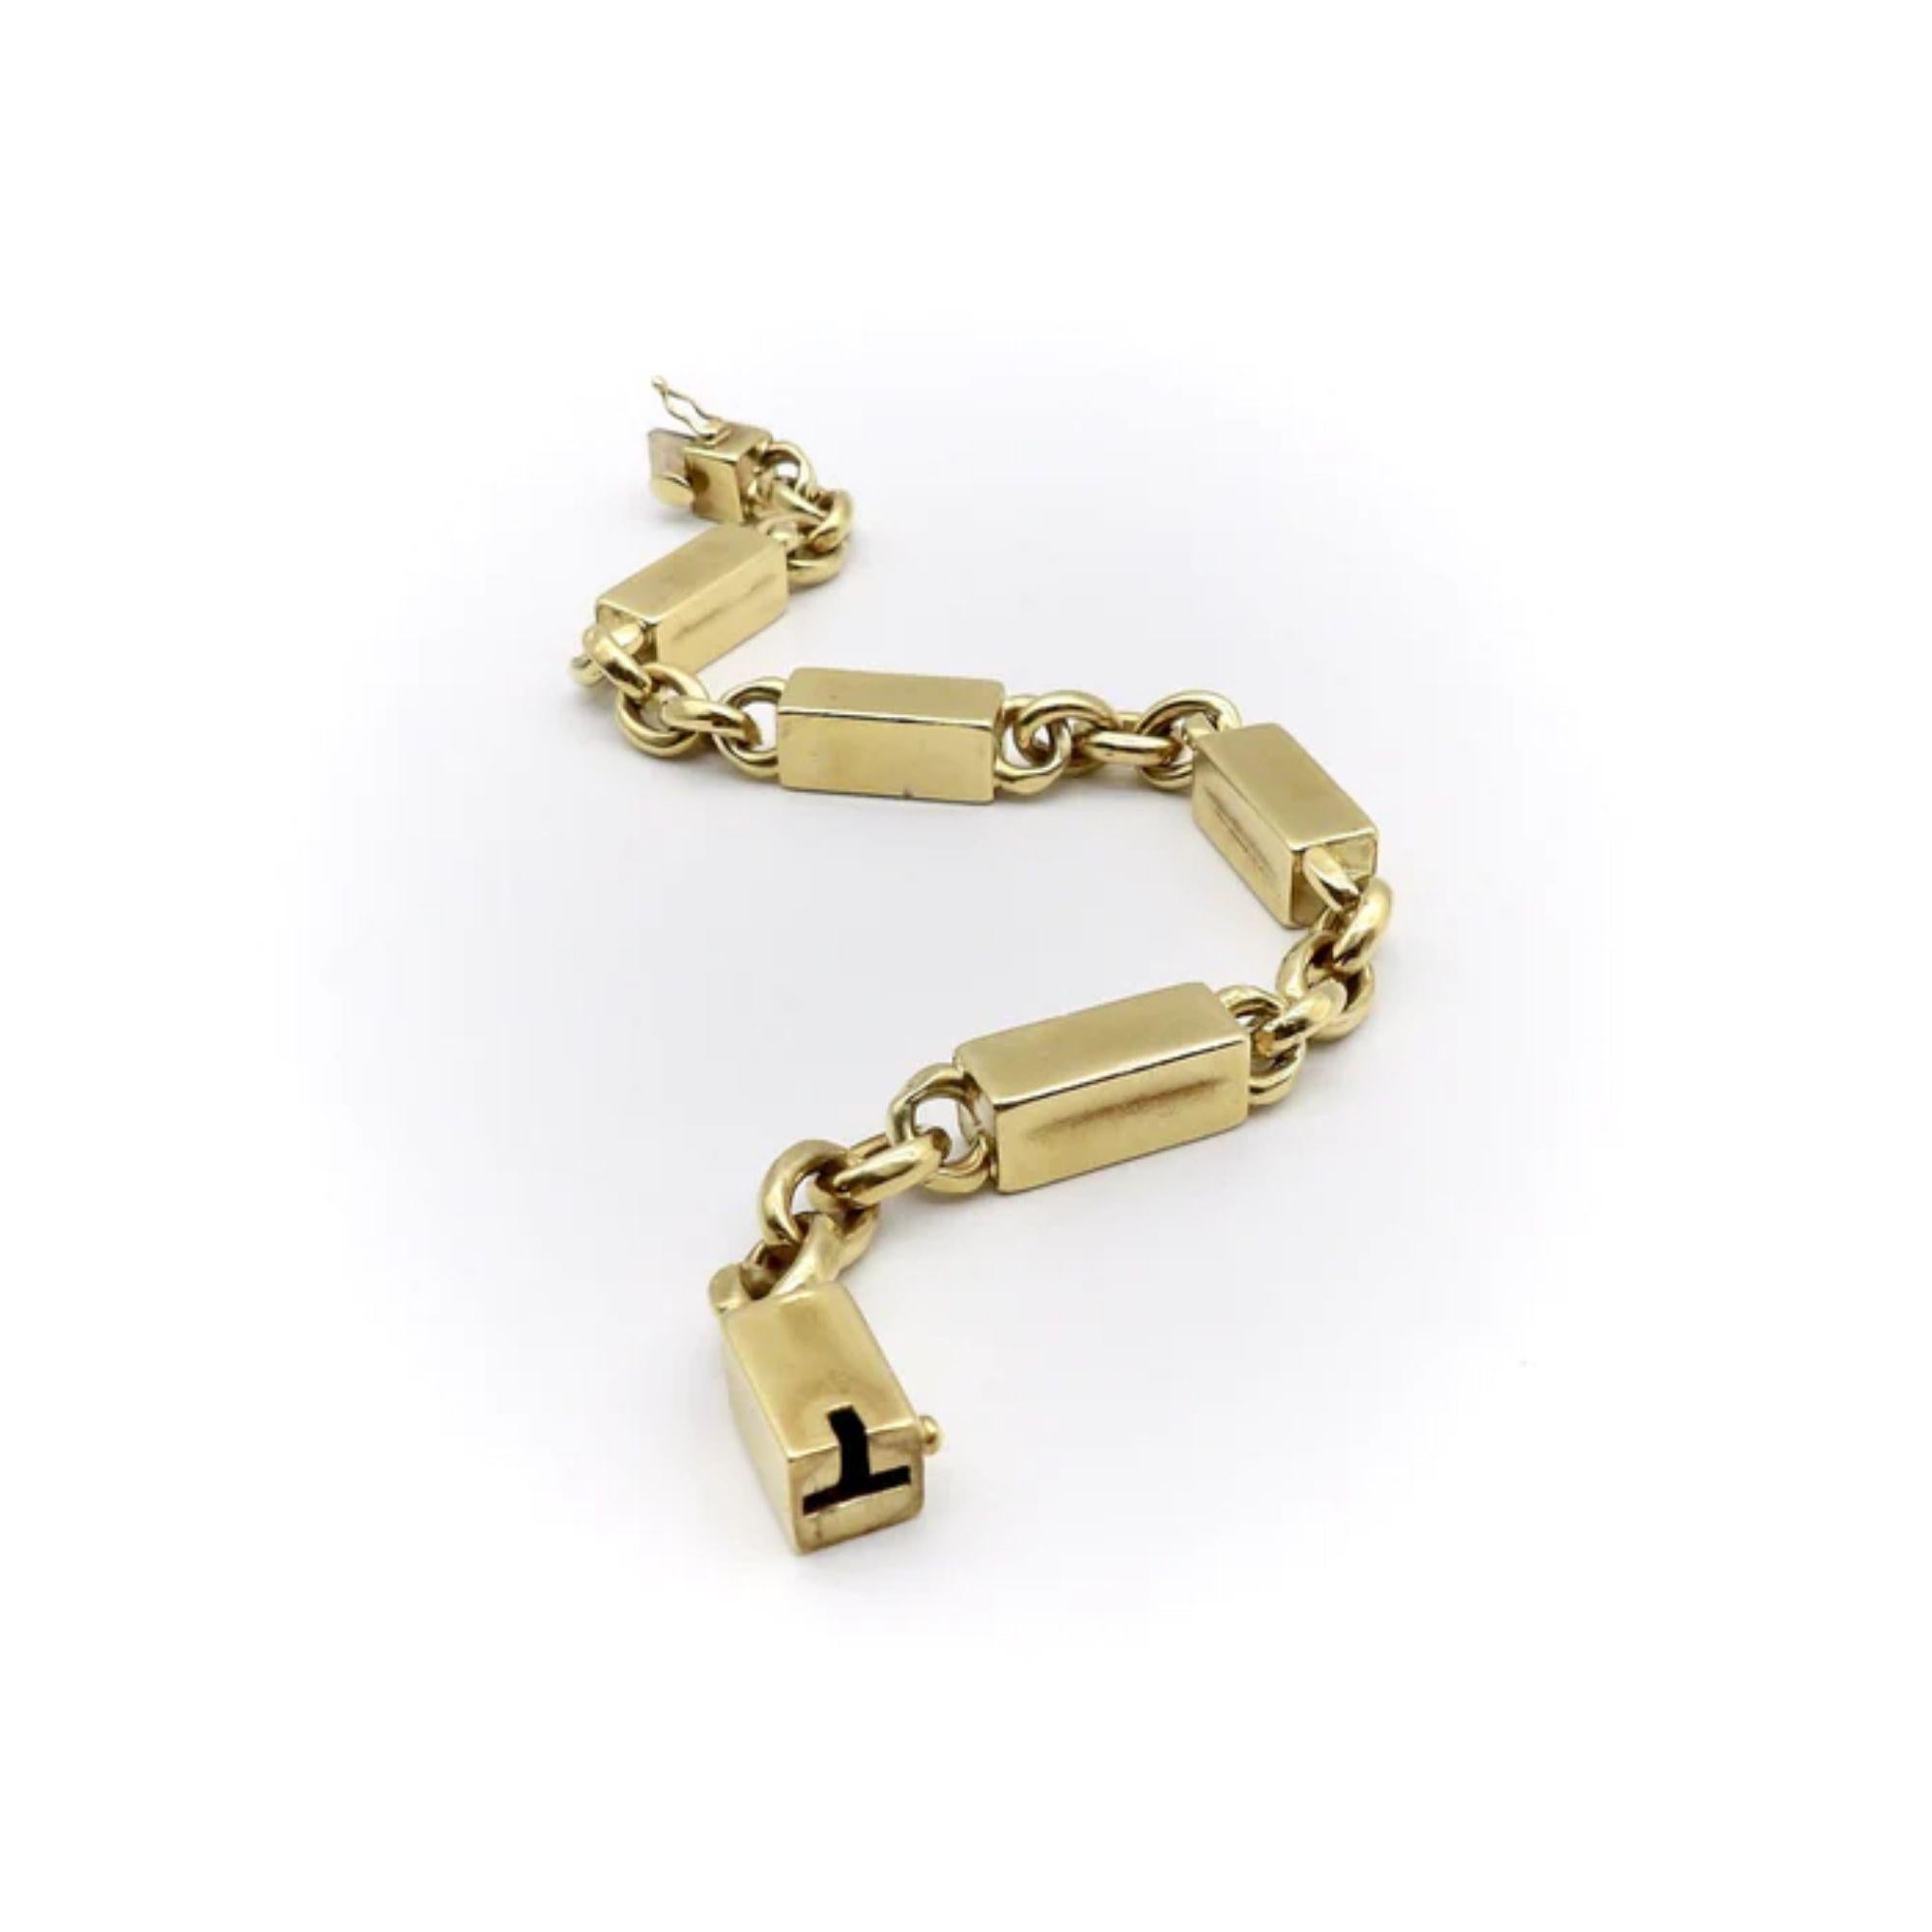 This bold, 1980's bar and link bracelet is made of 18k gold and is sure to make you stand out from the crowd. The large brick-like links are hard to miss and are tied together by equally eye-catching oval links. While this is a heavy bracelet, the